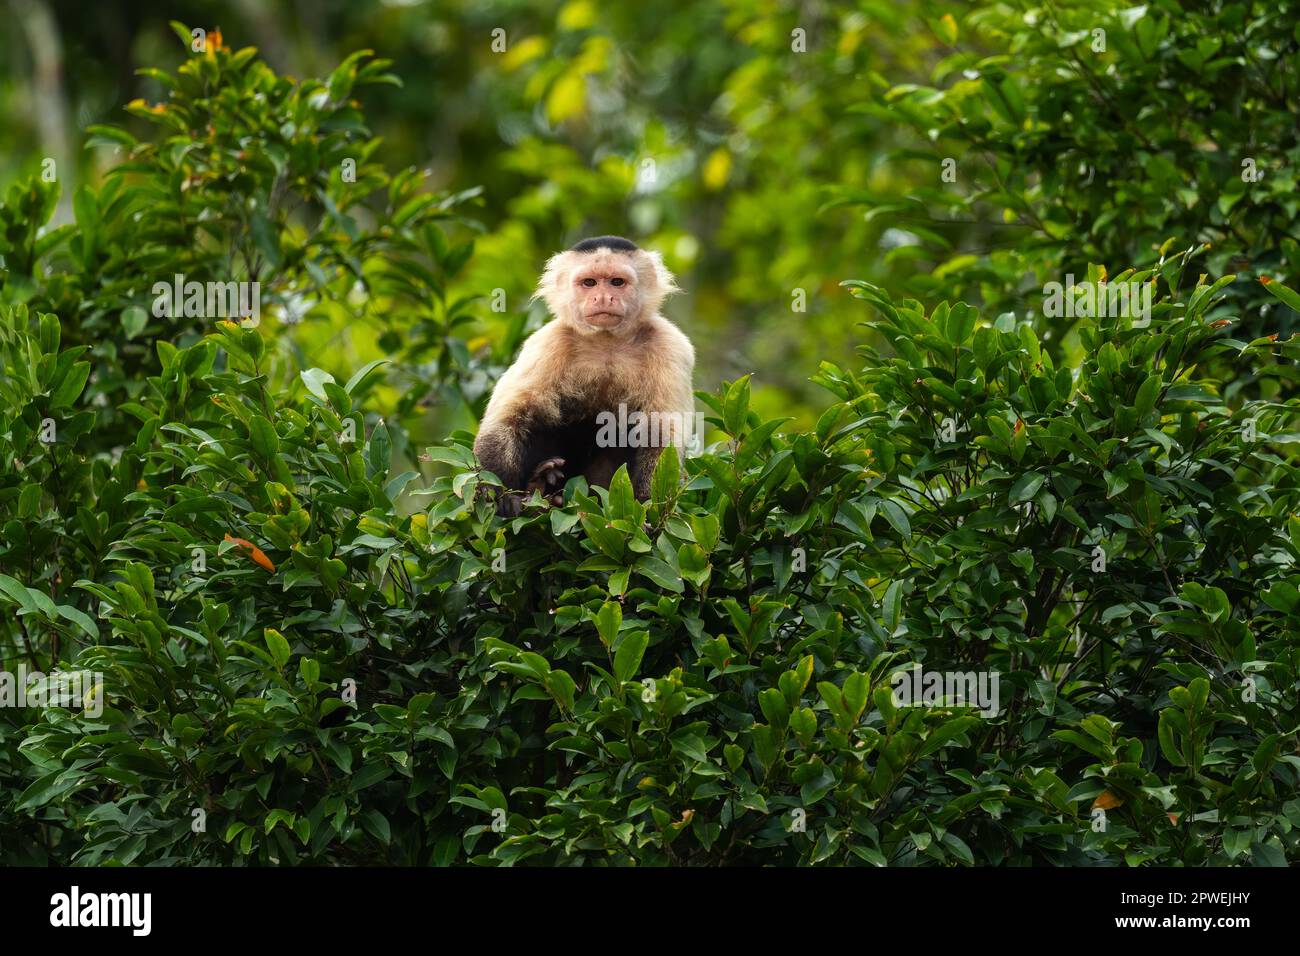 White-faced Capuchin - Cebus capucinus, beautiful brown white faced primate from Latin America forests, Gamboa forest, Panama. Stock Photo